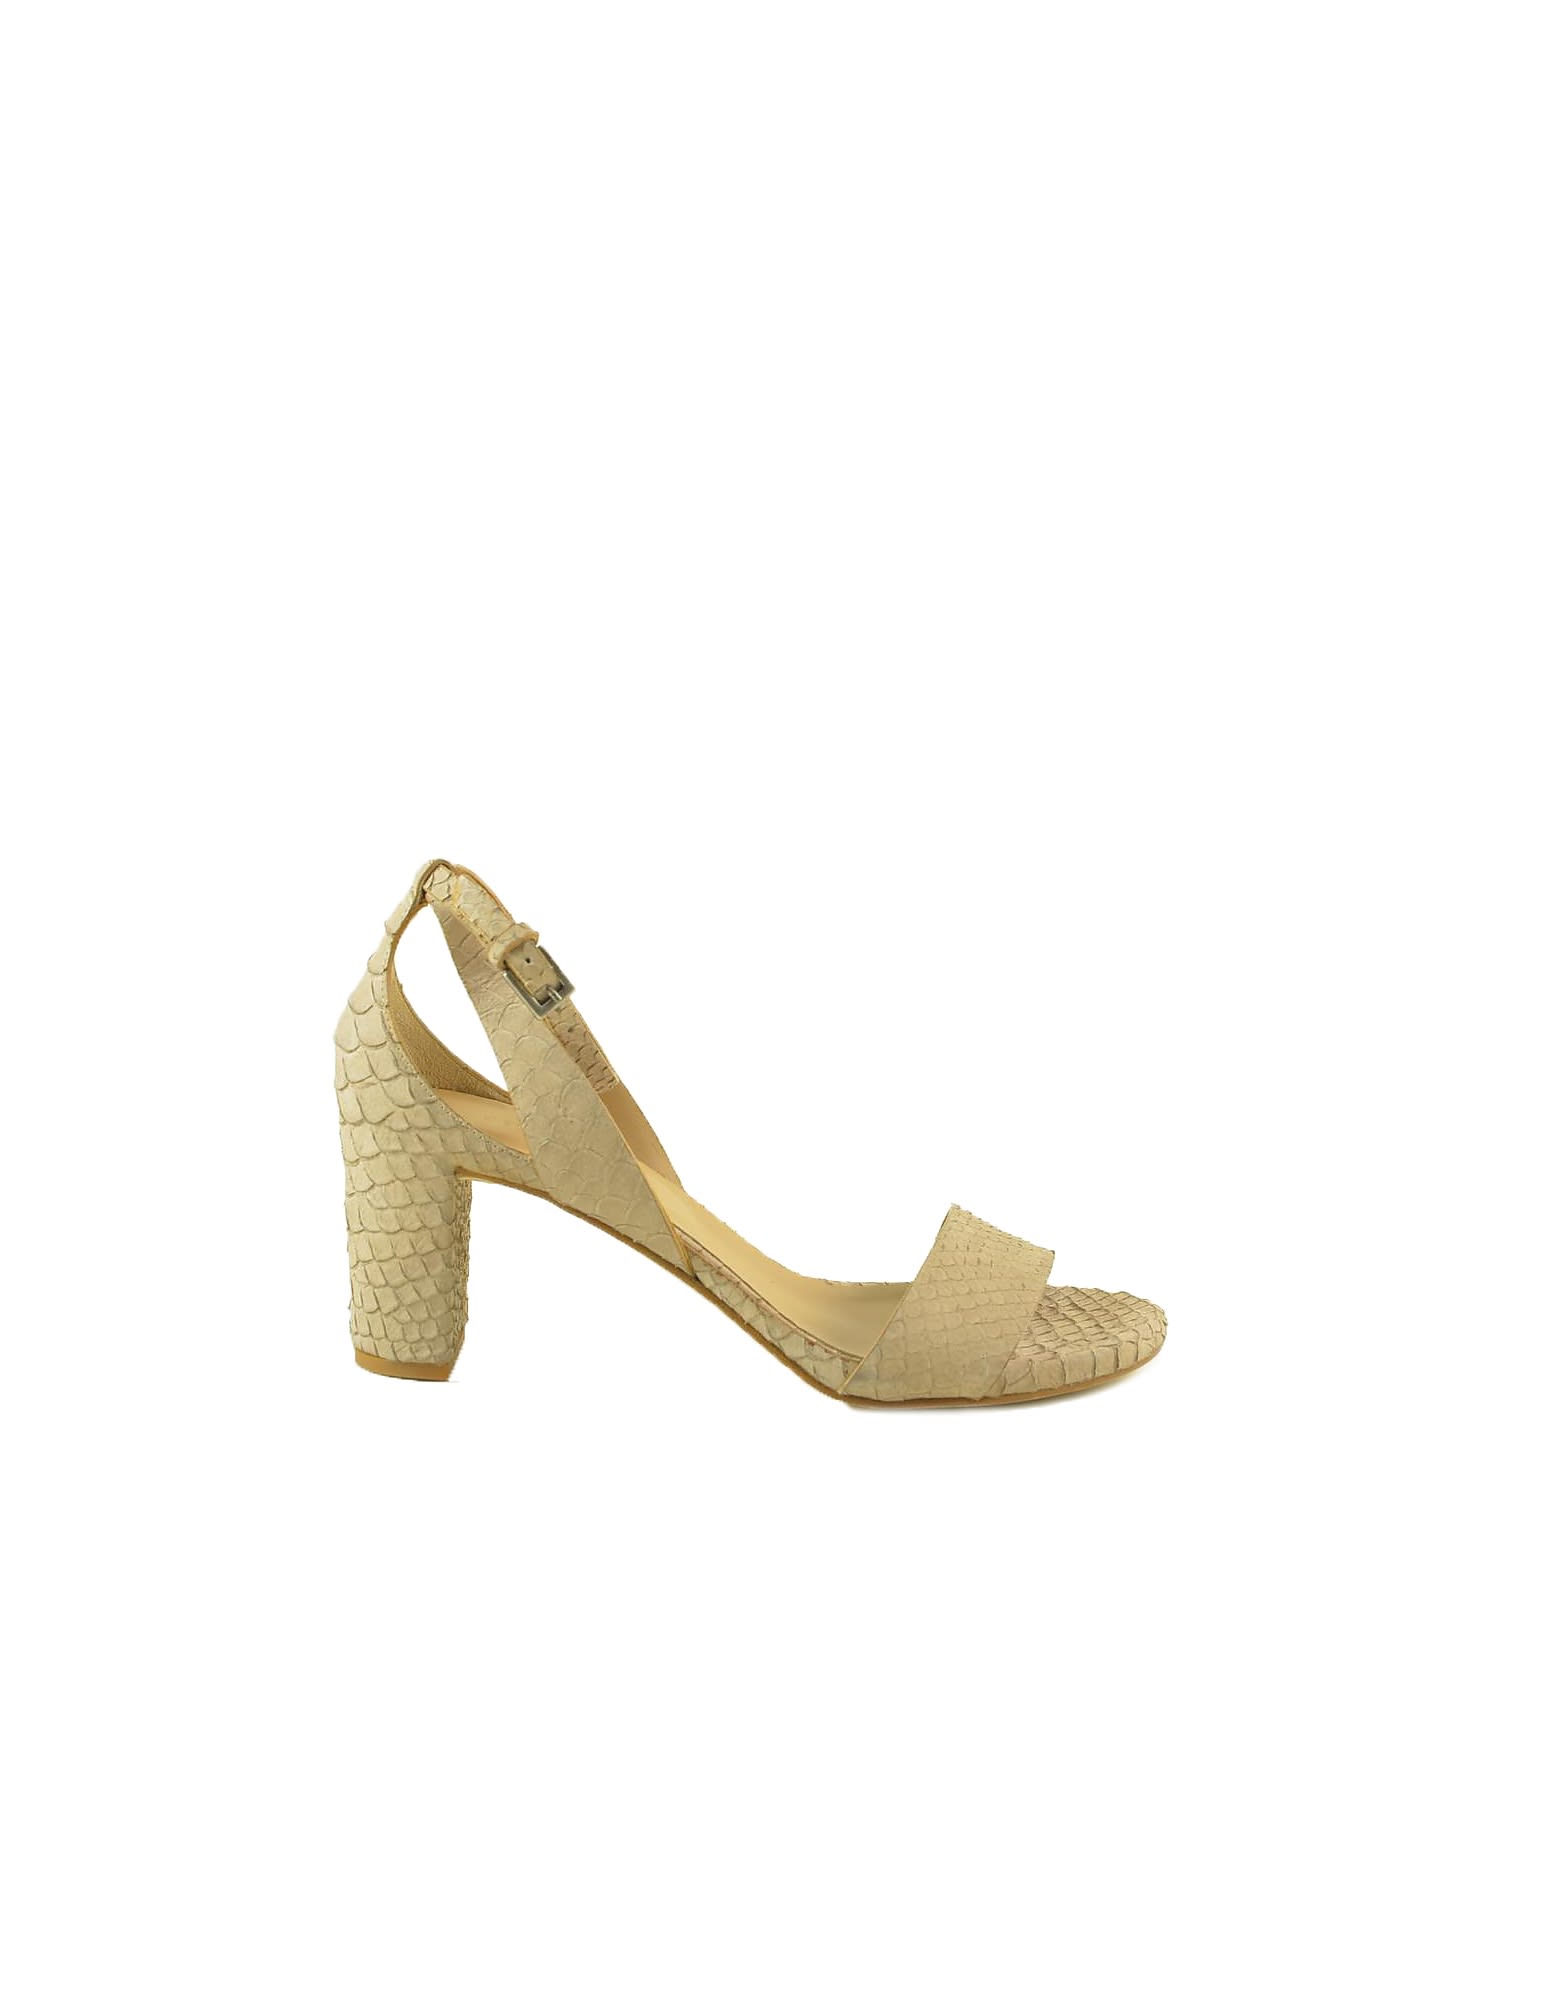 Del Carlo Beige Snake Printed Leather Sandals